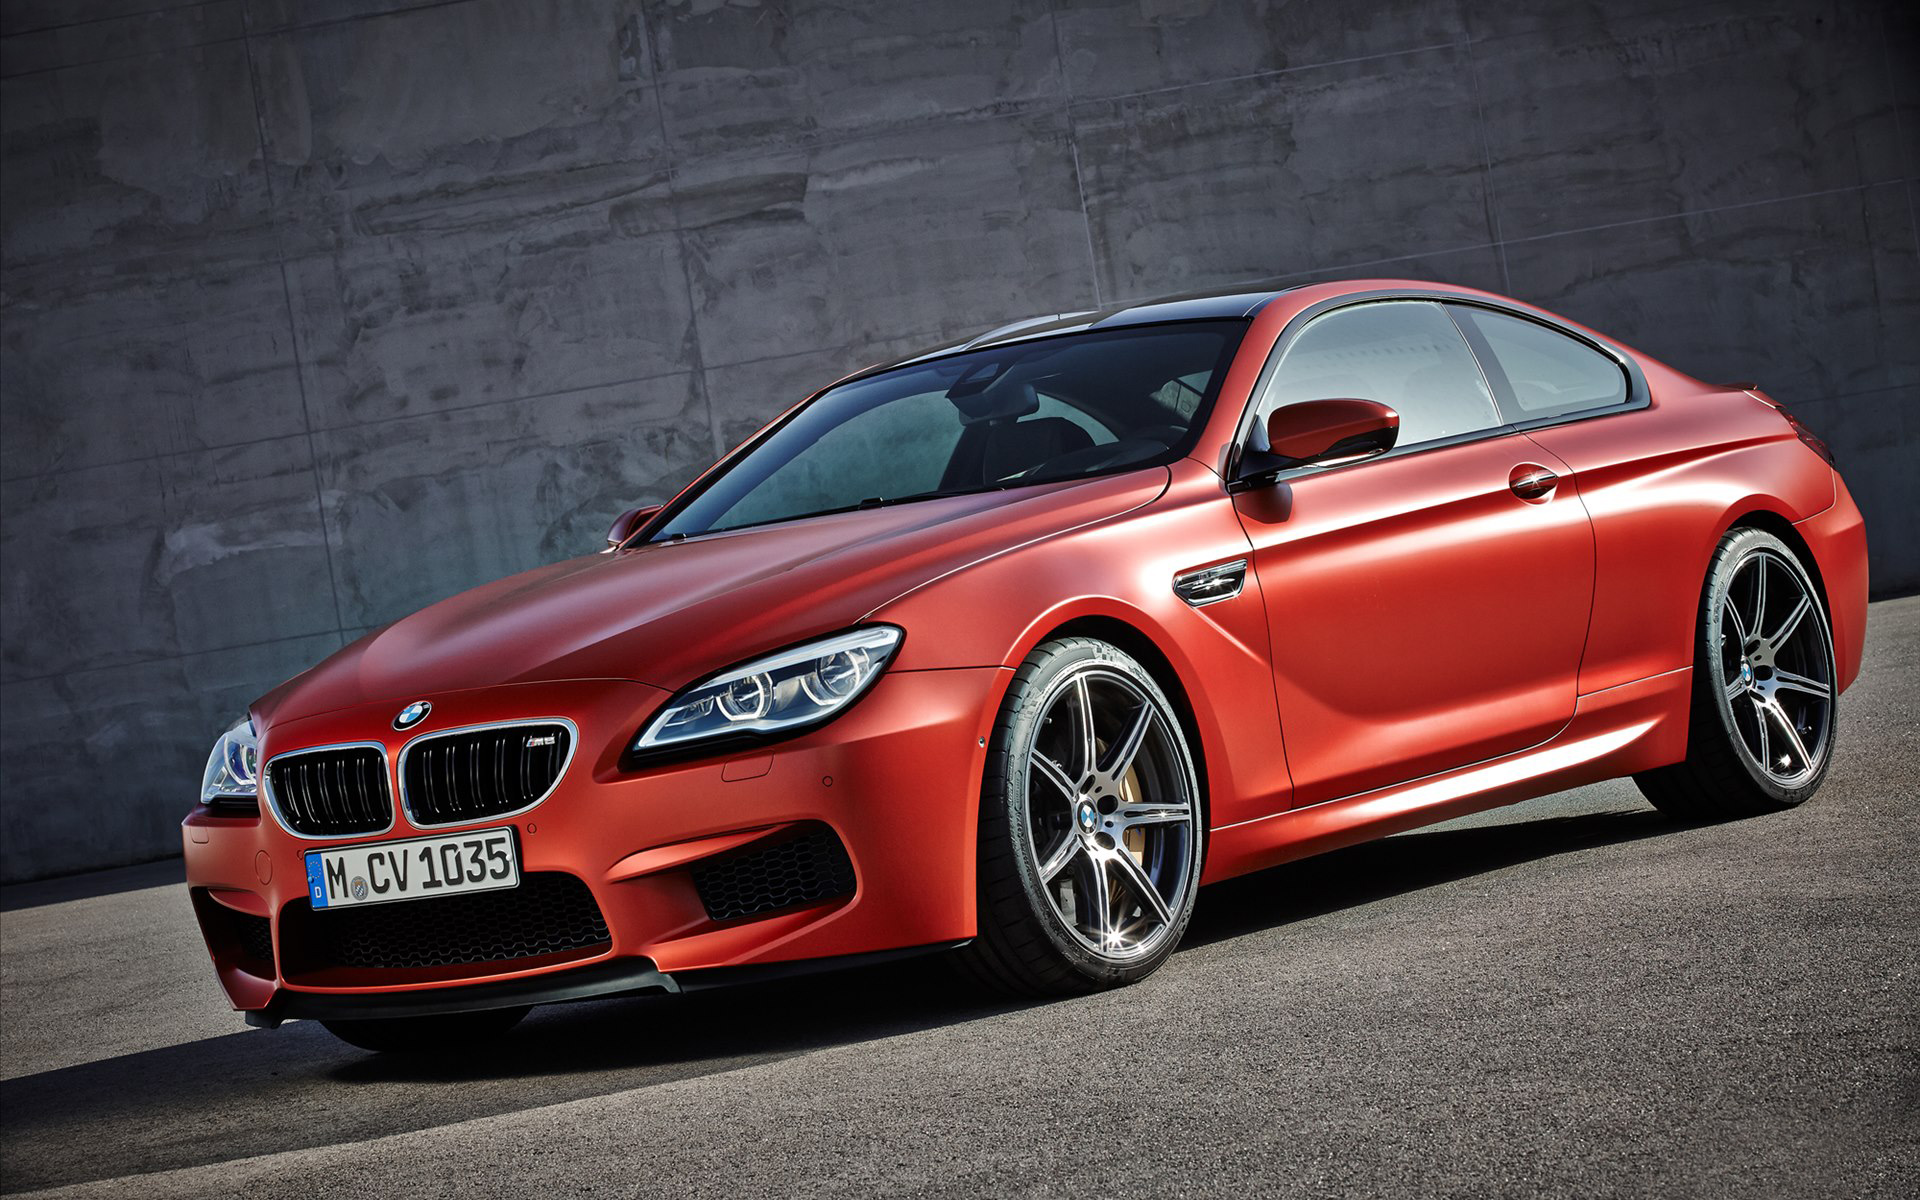 2015 Bmw M6 Coupe - Bmw 6 Series M6 , HD Wallpaper & Backgrounds